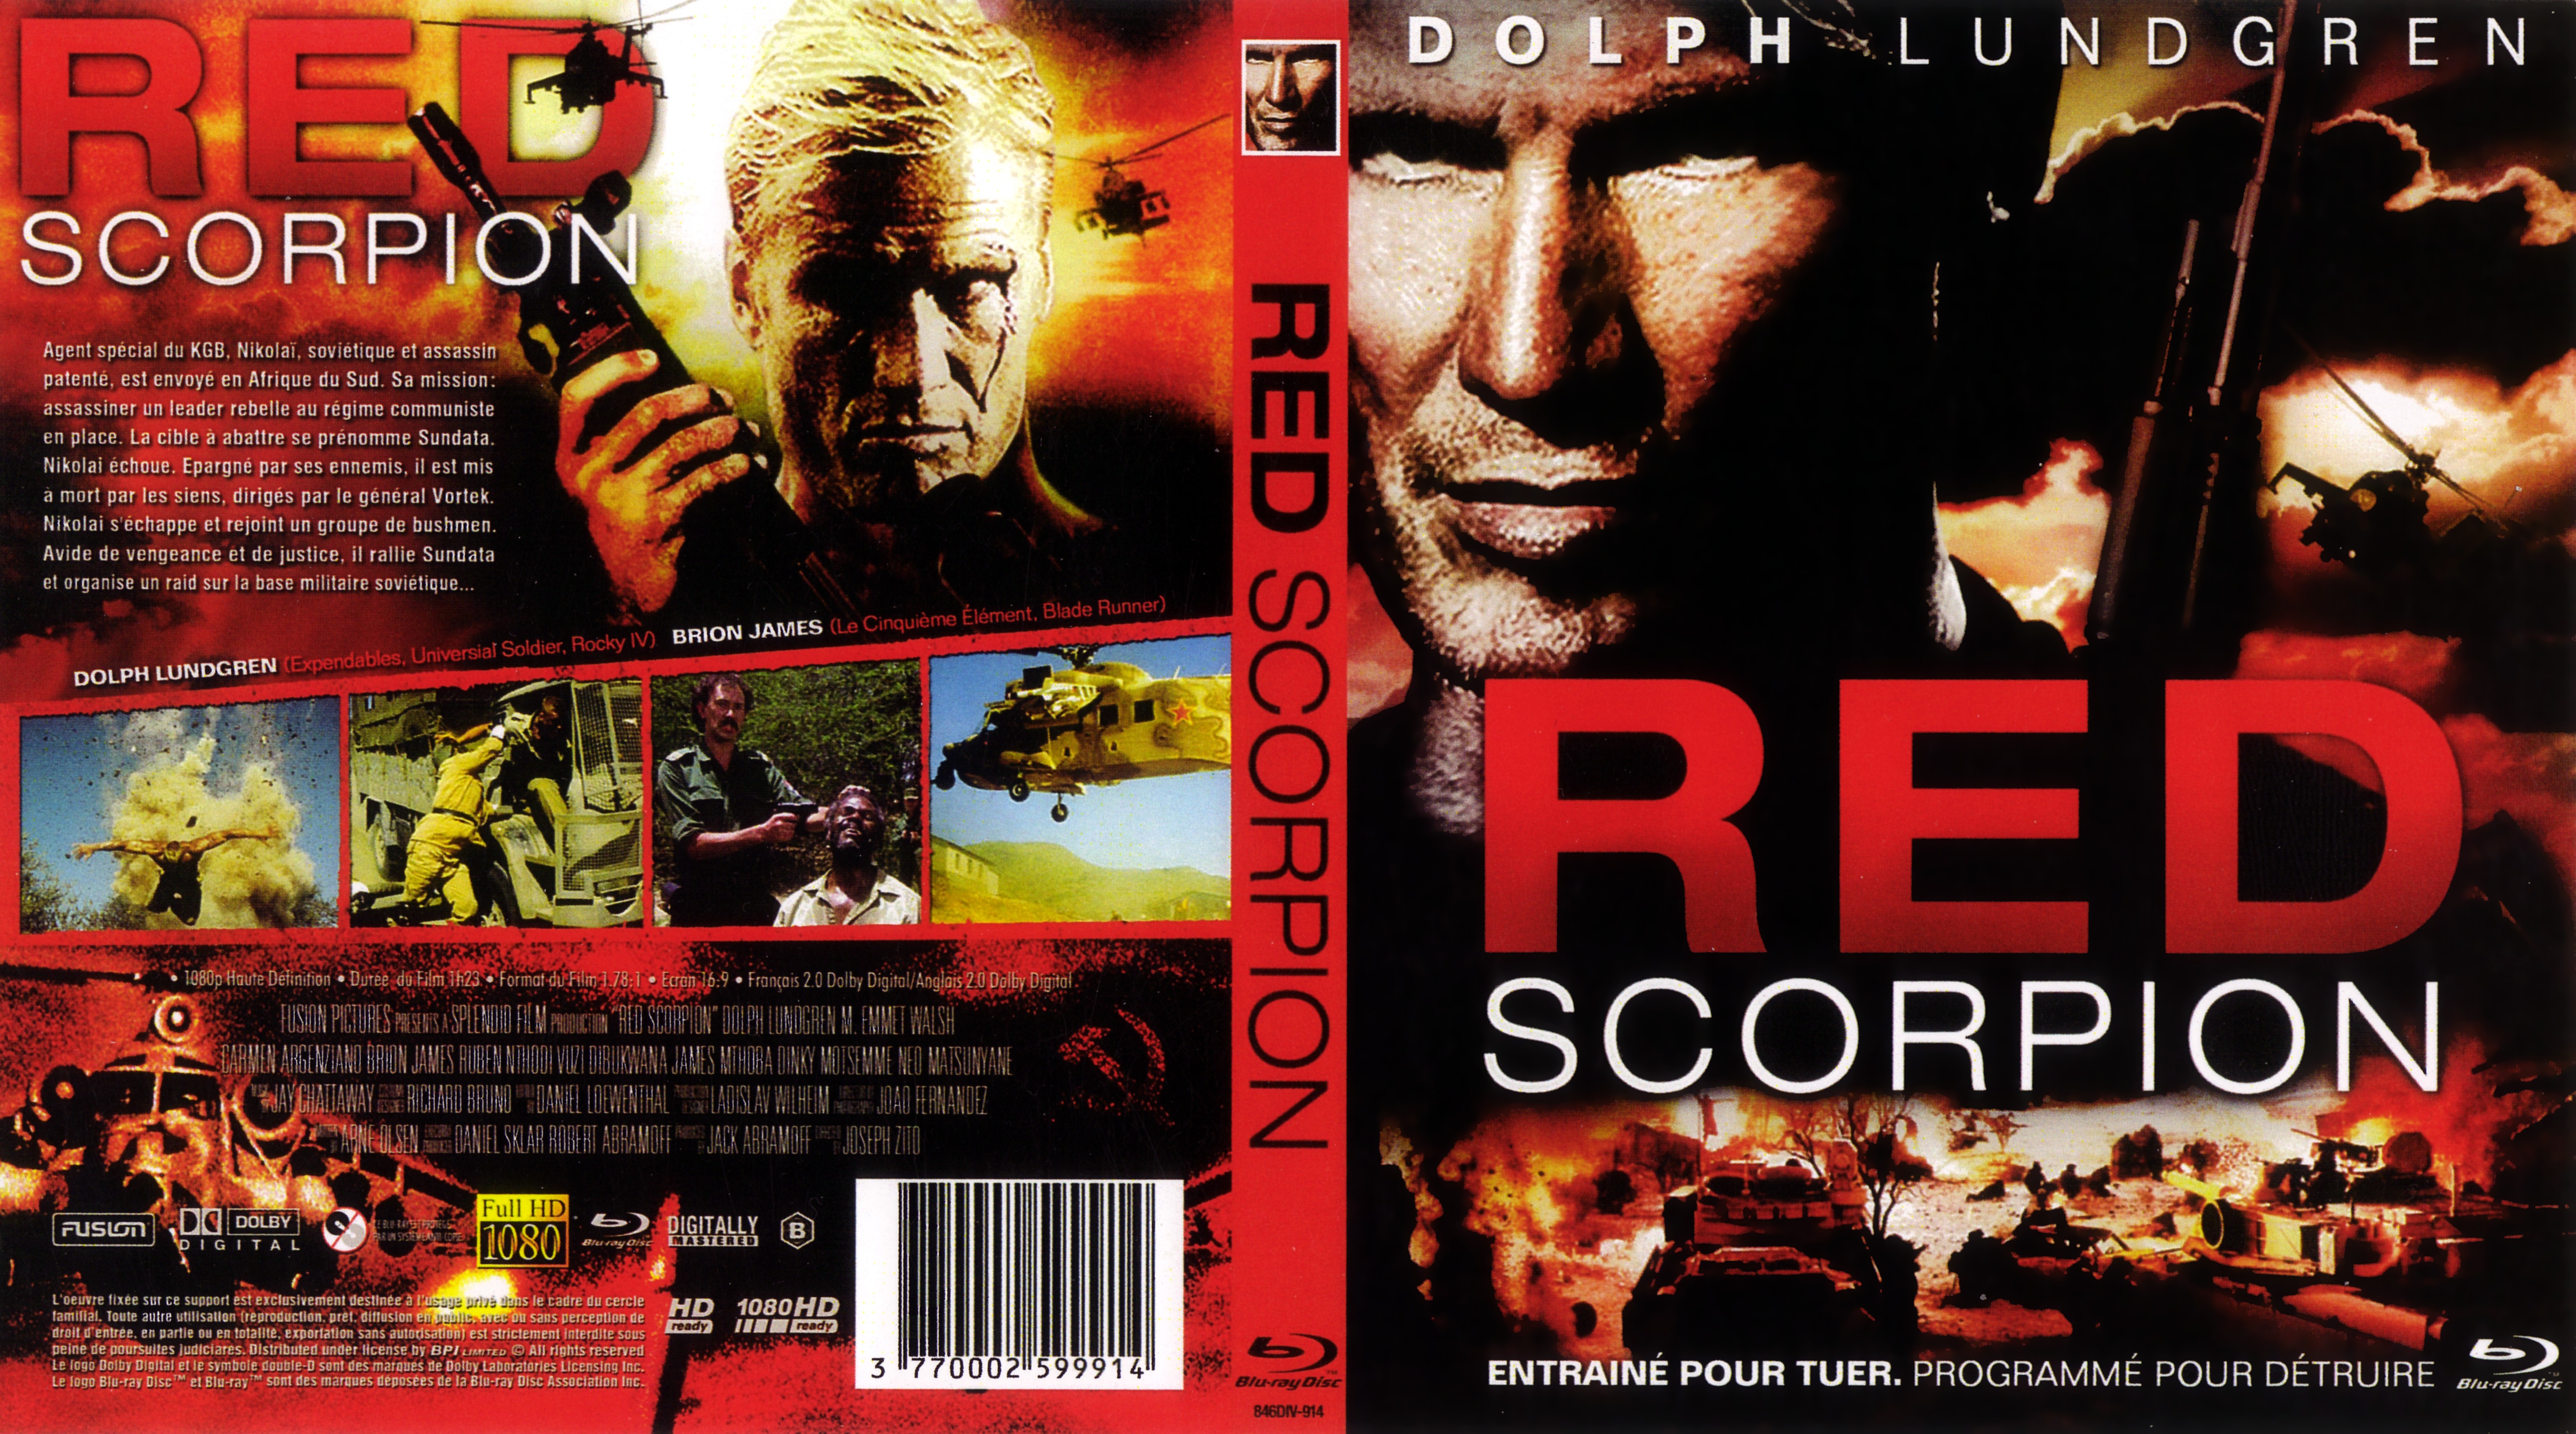 Jaquette DVD Red scorpion (BLU-RAY)